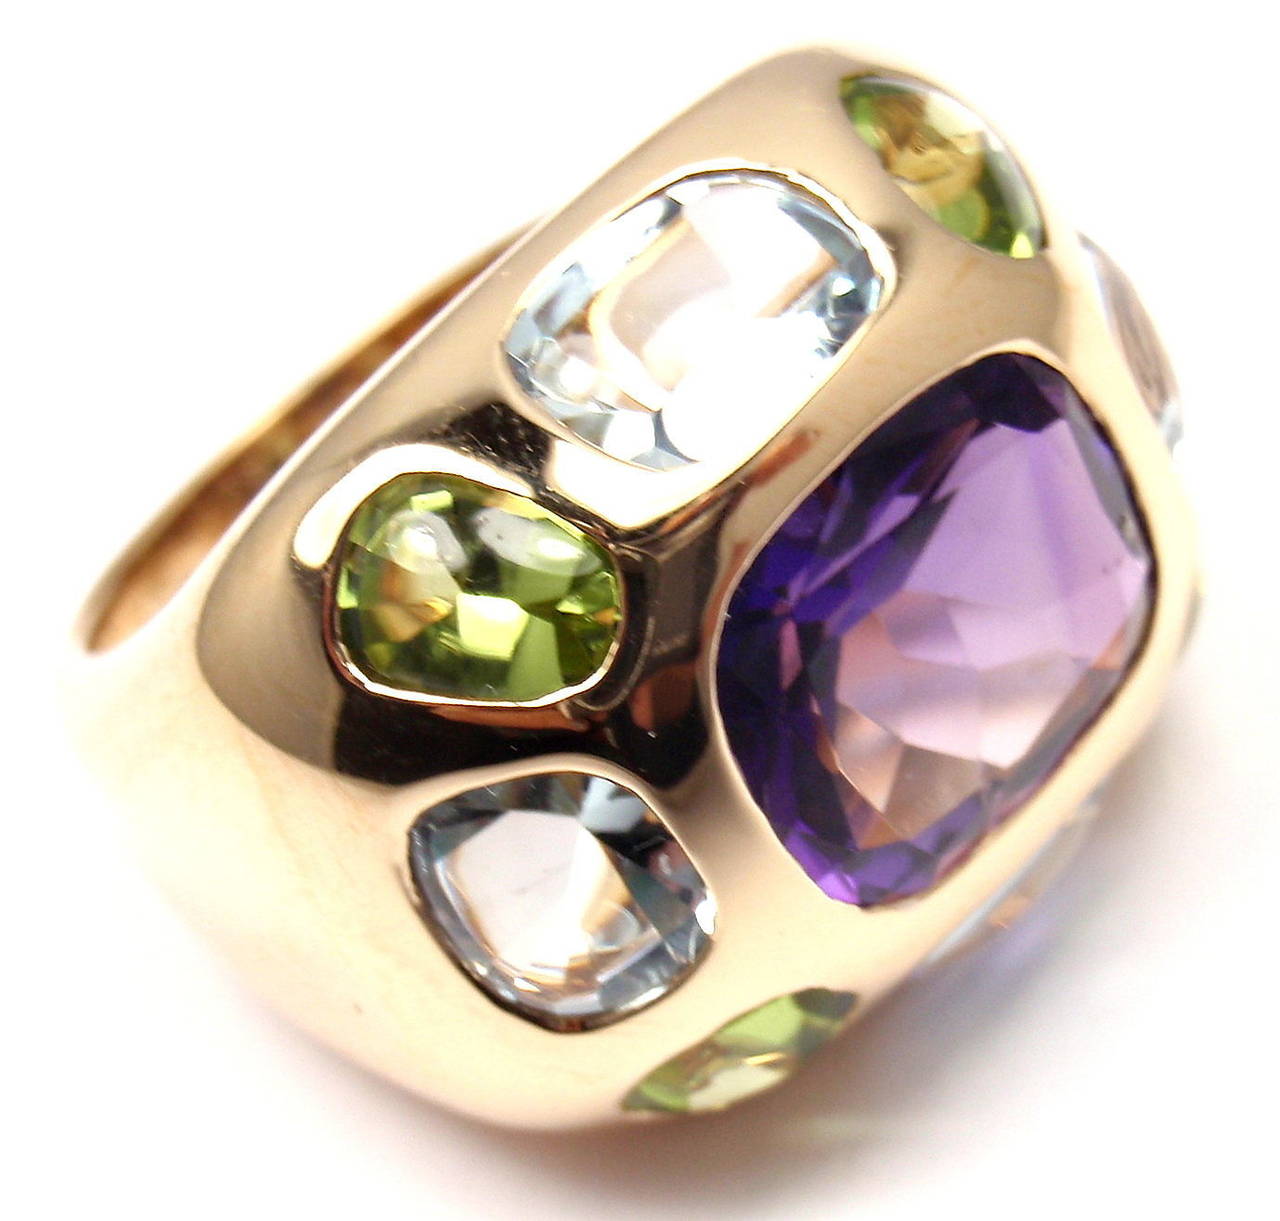 18k Yellow Gold Baroque Amethyst Aquamarine Peridot Ring by Chanel. 
With 1 Amethyst: 9mm x 11mm
4 Peridots: 4mm x 5mm
4 Aquamarines: 4mm x 5mm

Details: 
Size: 5 3/4
Width: 18mm
Weight: 14.5 grams
Stamped Hallmarks: Chanel 750